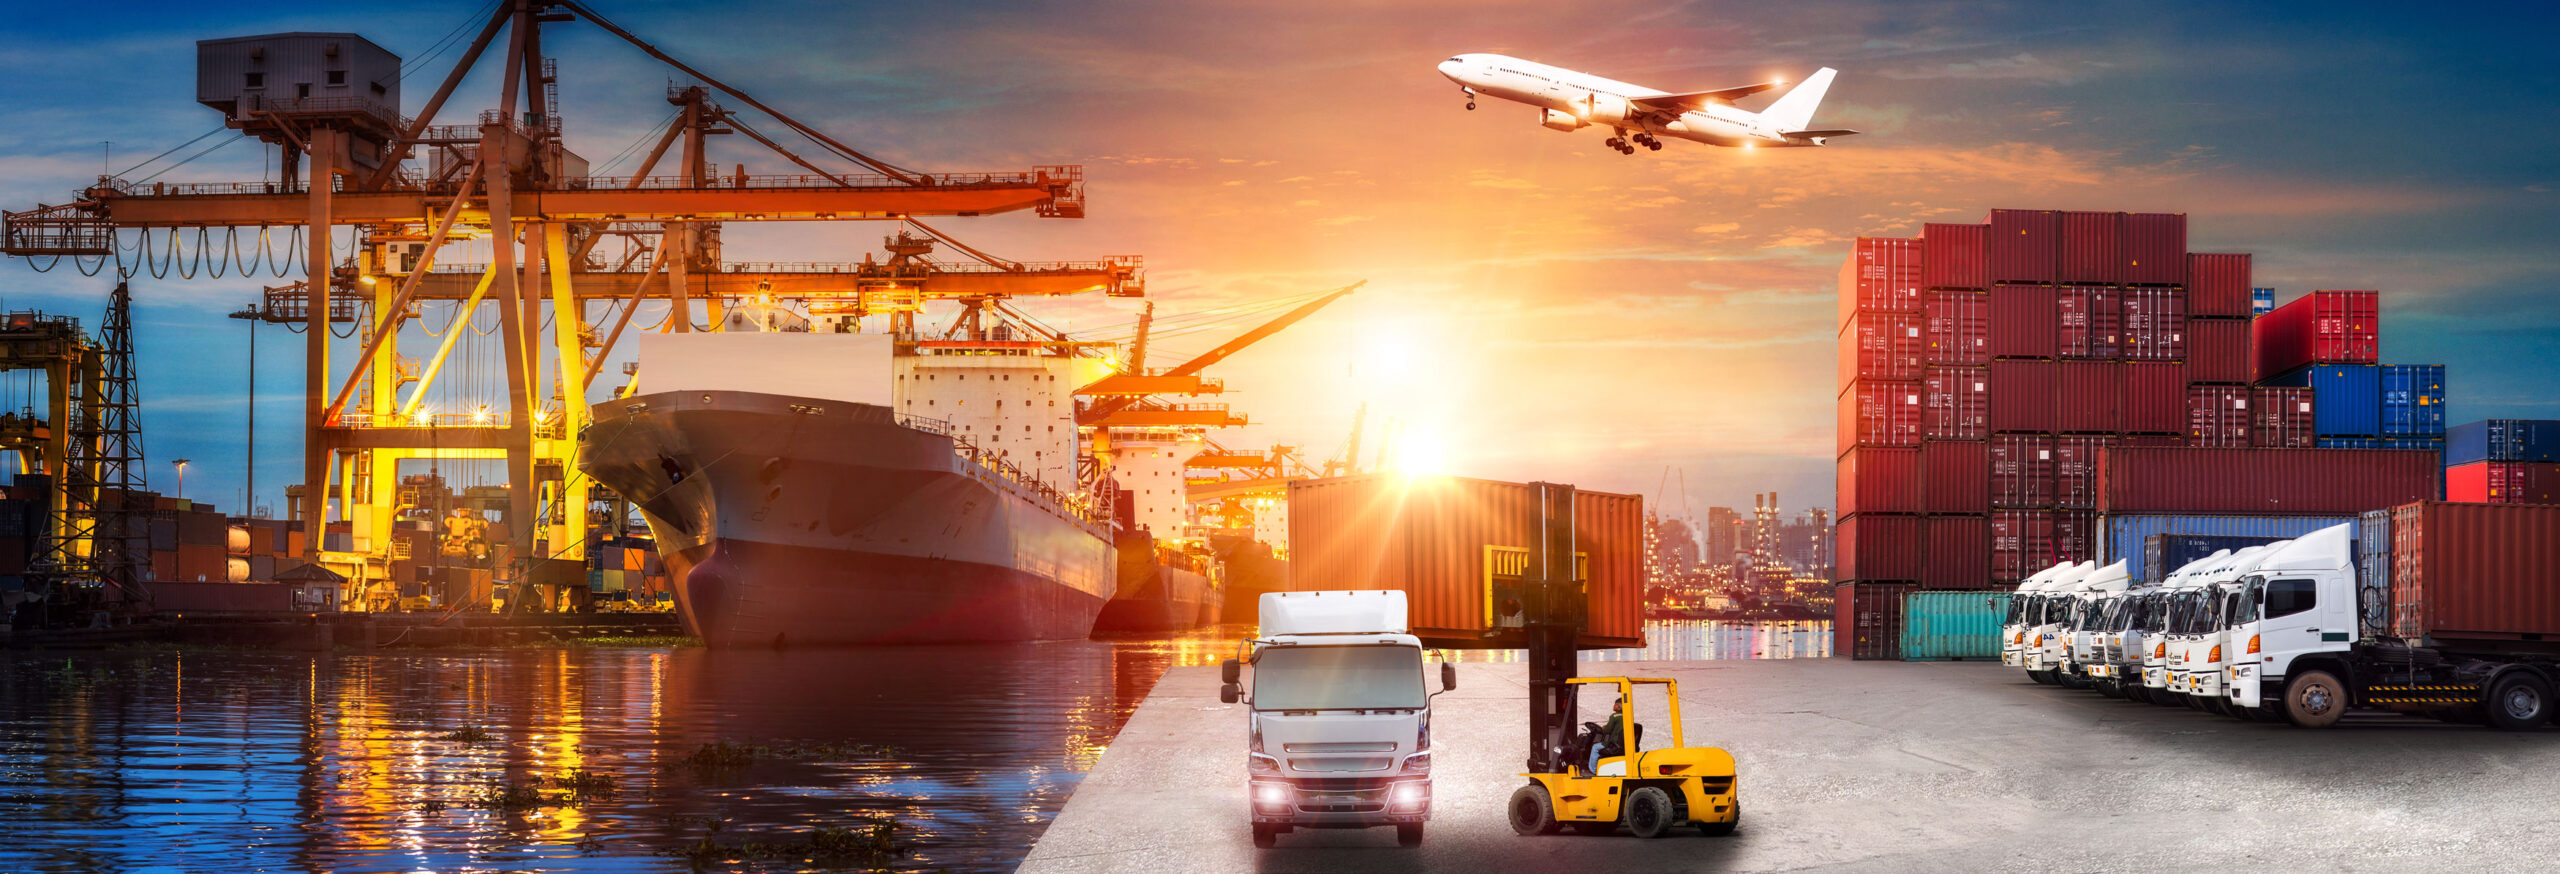 Cargo Logistics Canada & Pacific Chapter of CILTNA – Expo + Conference February 7th, 2019,  8:30-9:45am